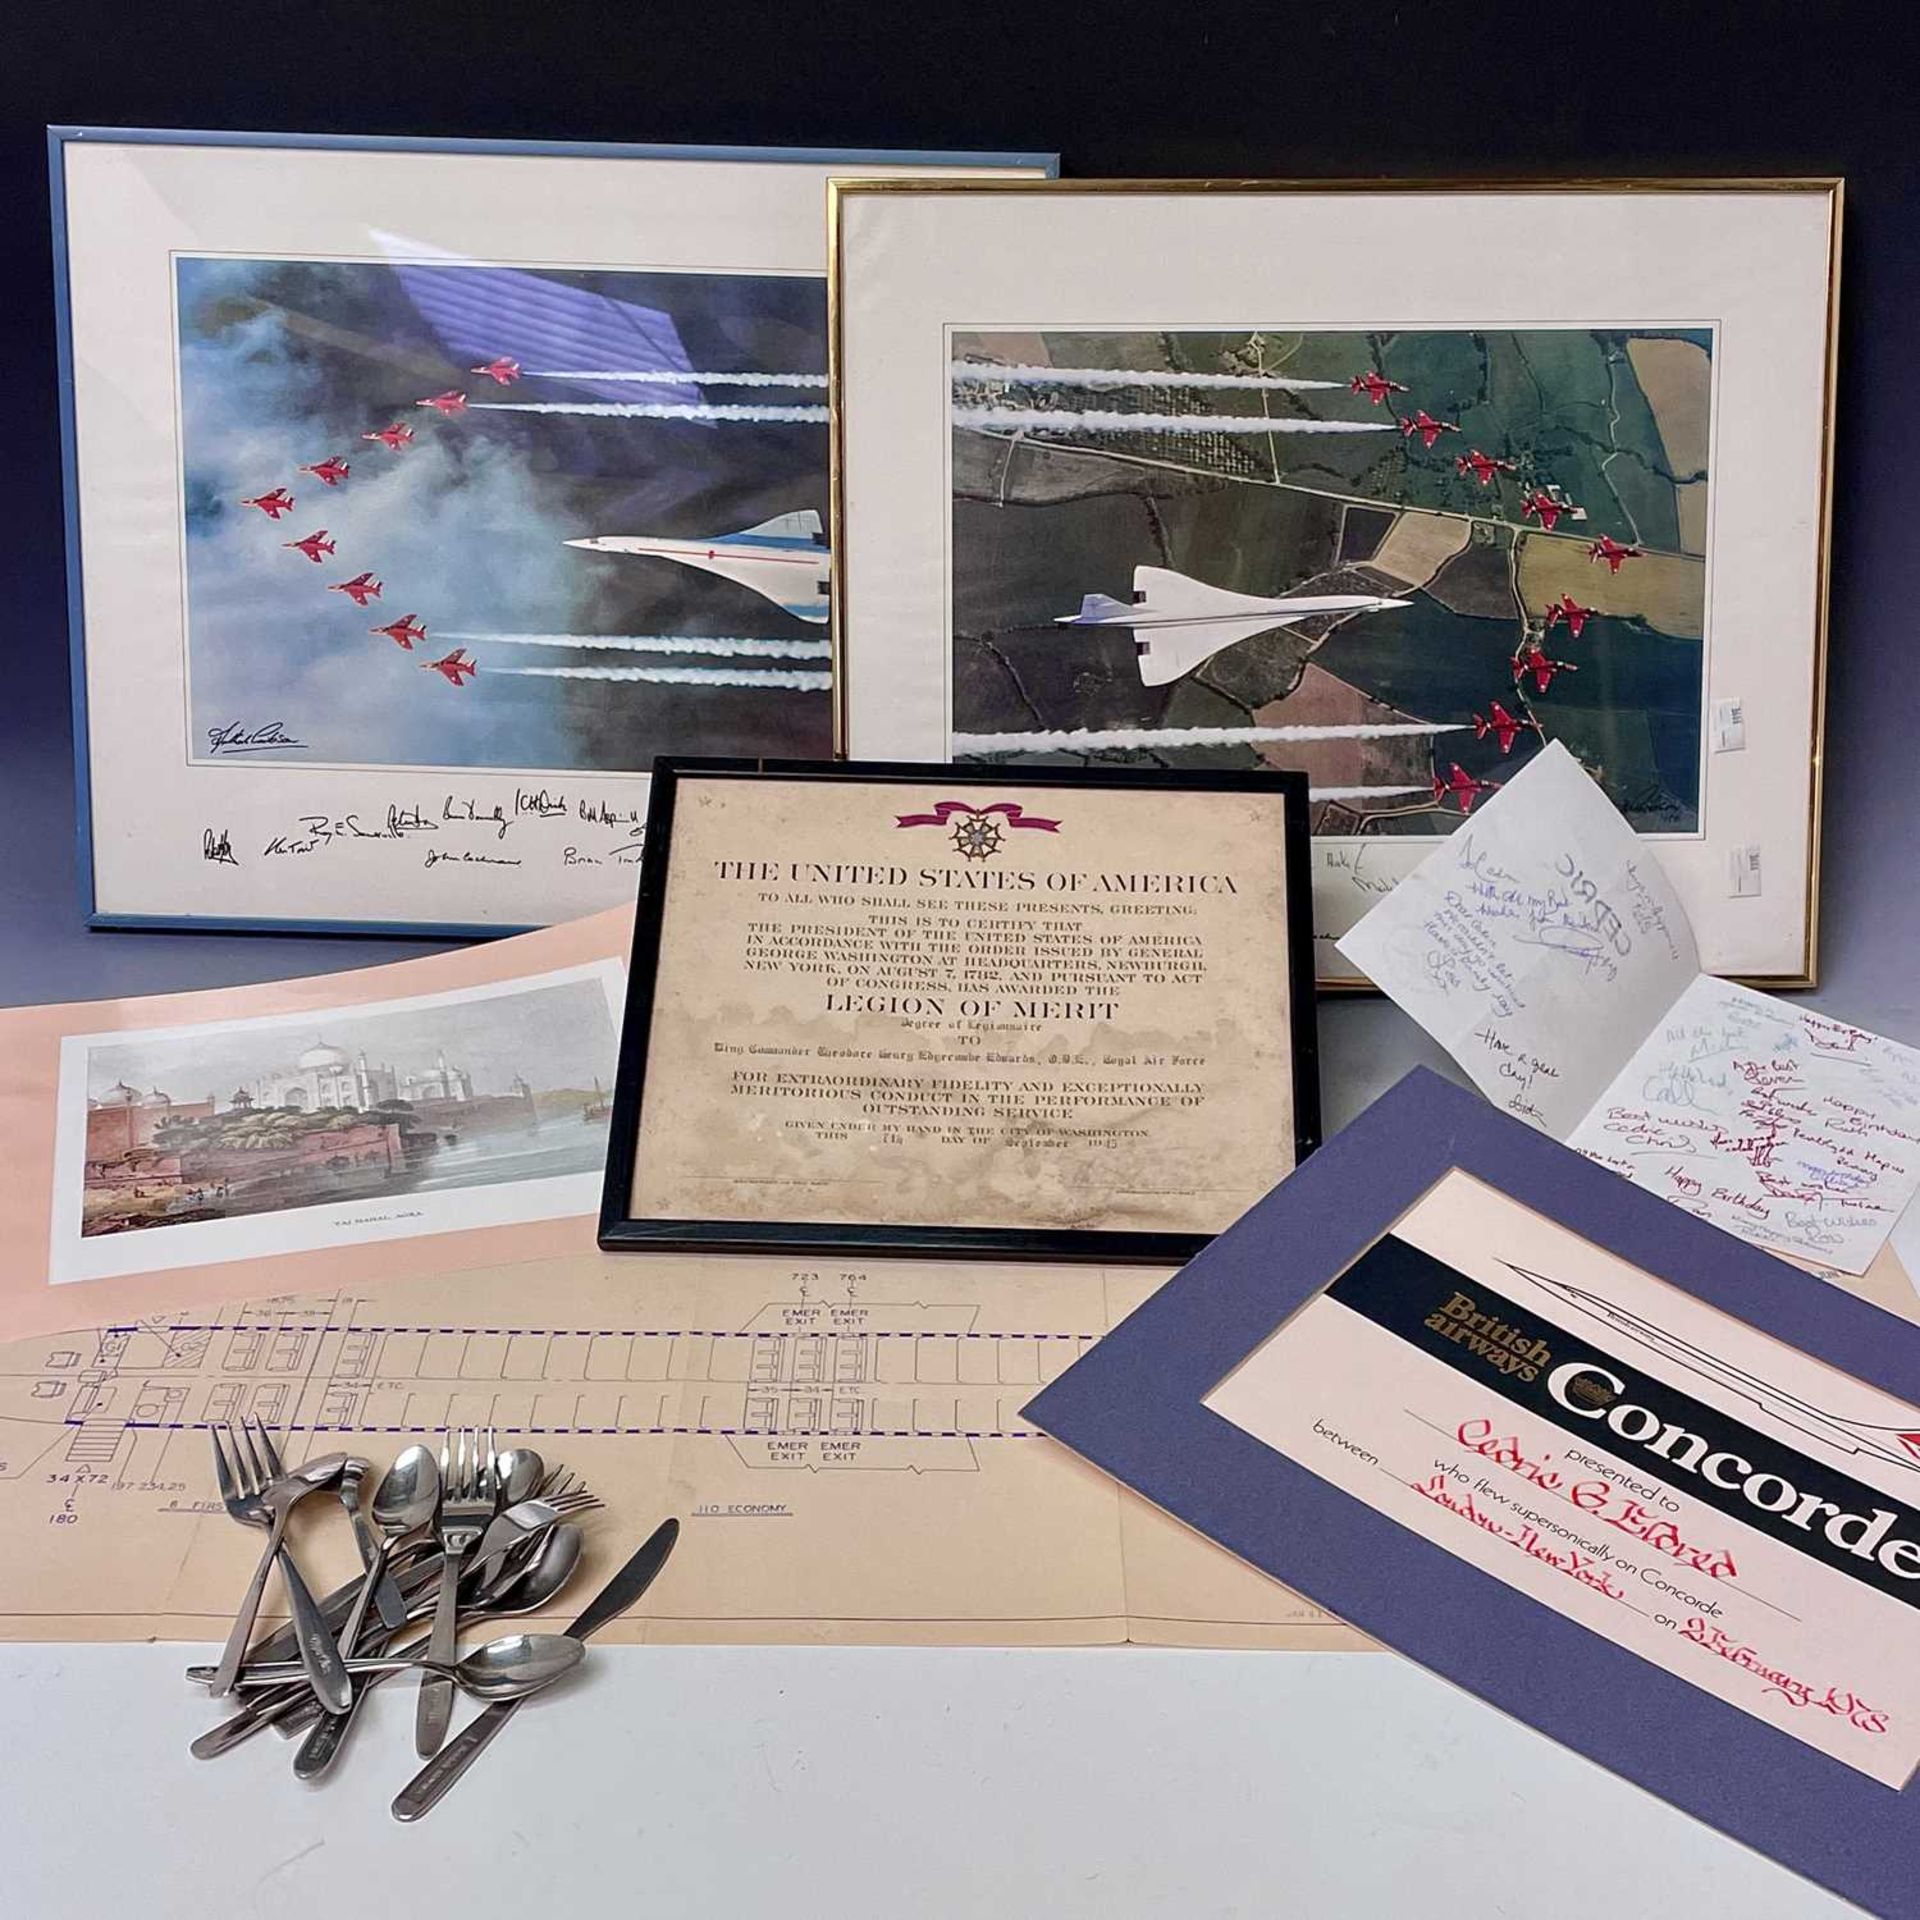 Transport Aviation - Concorde / Red Arrows, etc Interest. Lot comprises two 20" x 16" framed and